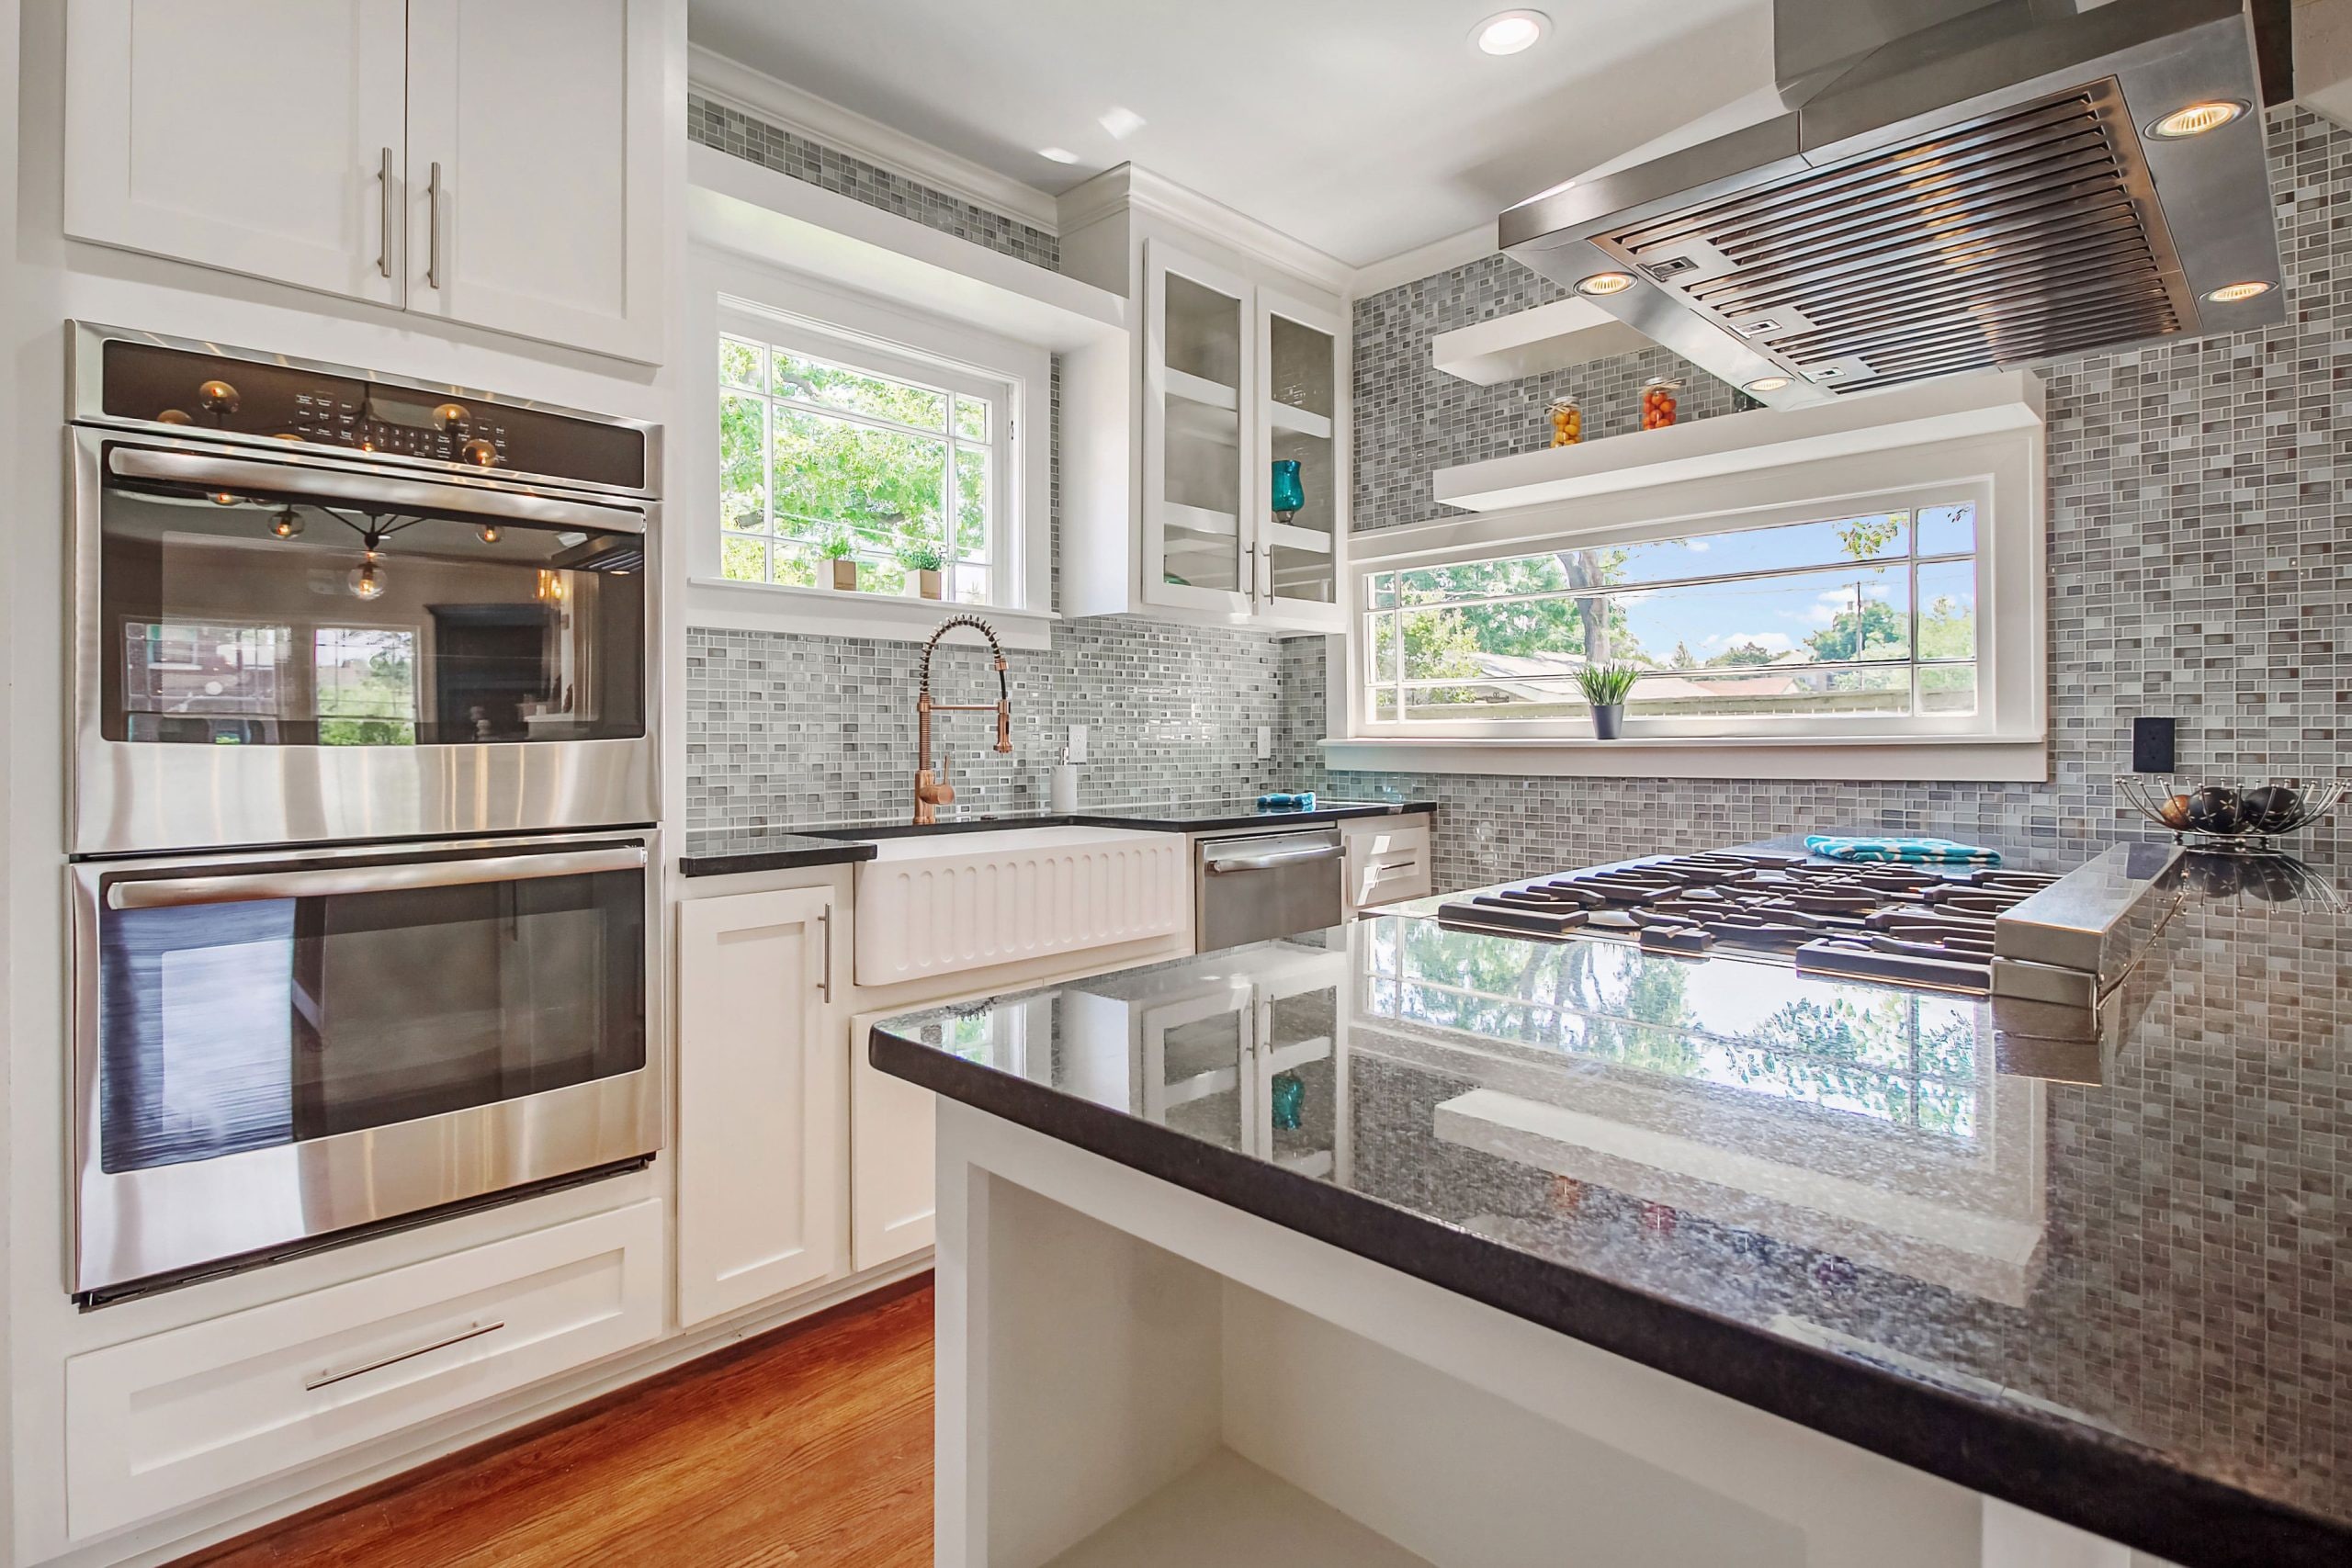 Home - Rich City Kitchen Remodeling Co